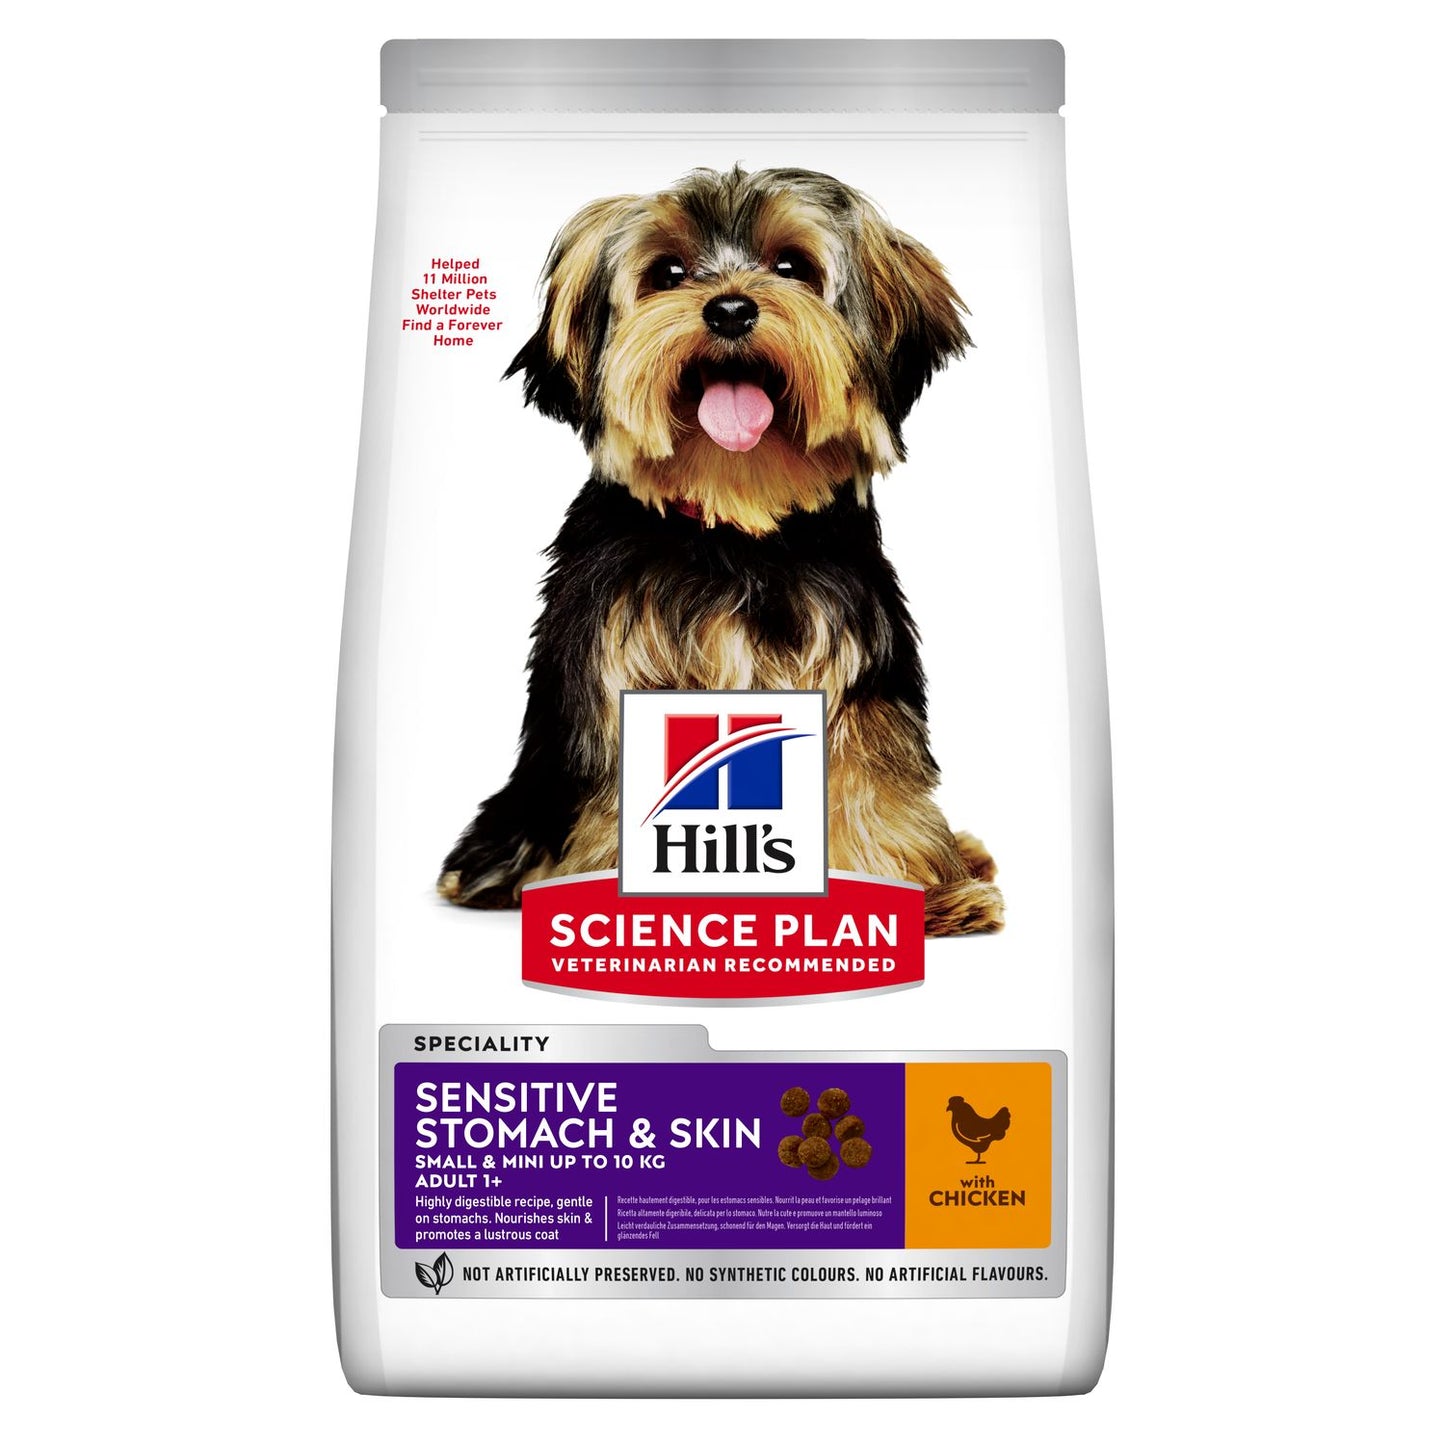 Hill's Science Plan Sensitive Stomach and Skin Small and Mini with Chicken Dog Food